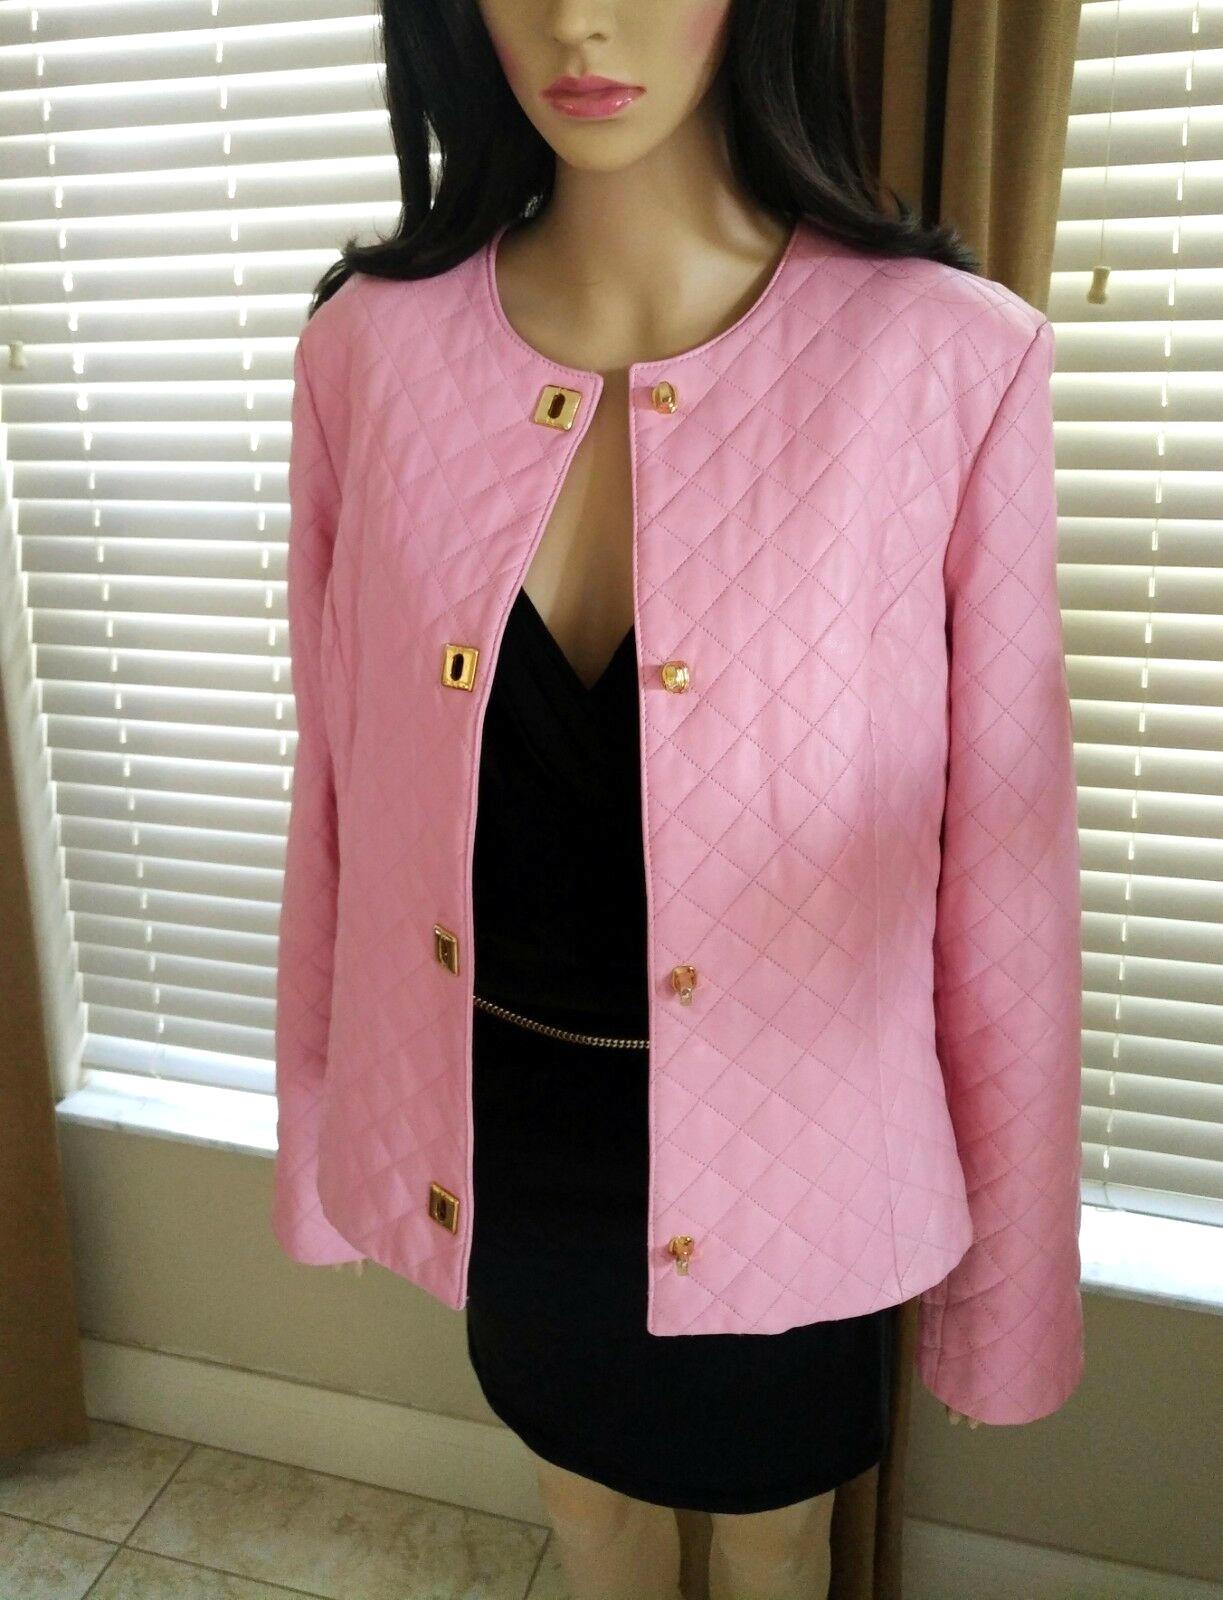  Gianfranco Ferre Petal Pink Quilted Lambskin Leather Jacket EU 38/ US 4 6 For Sale 5